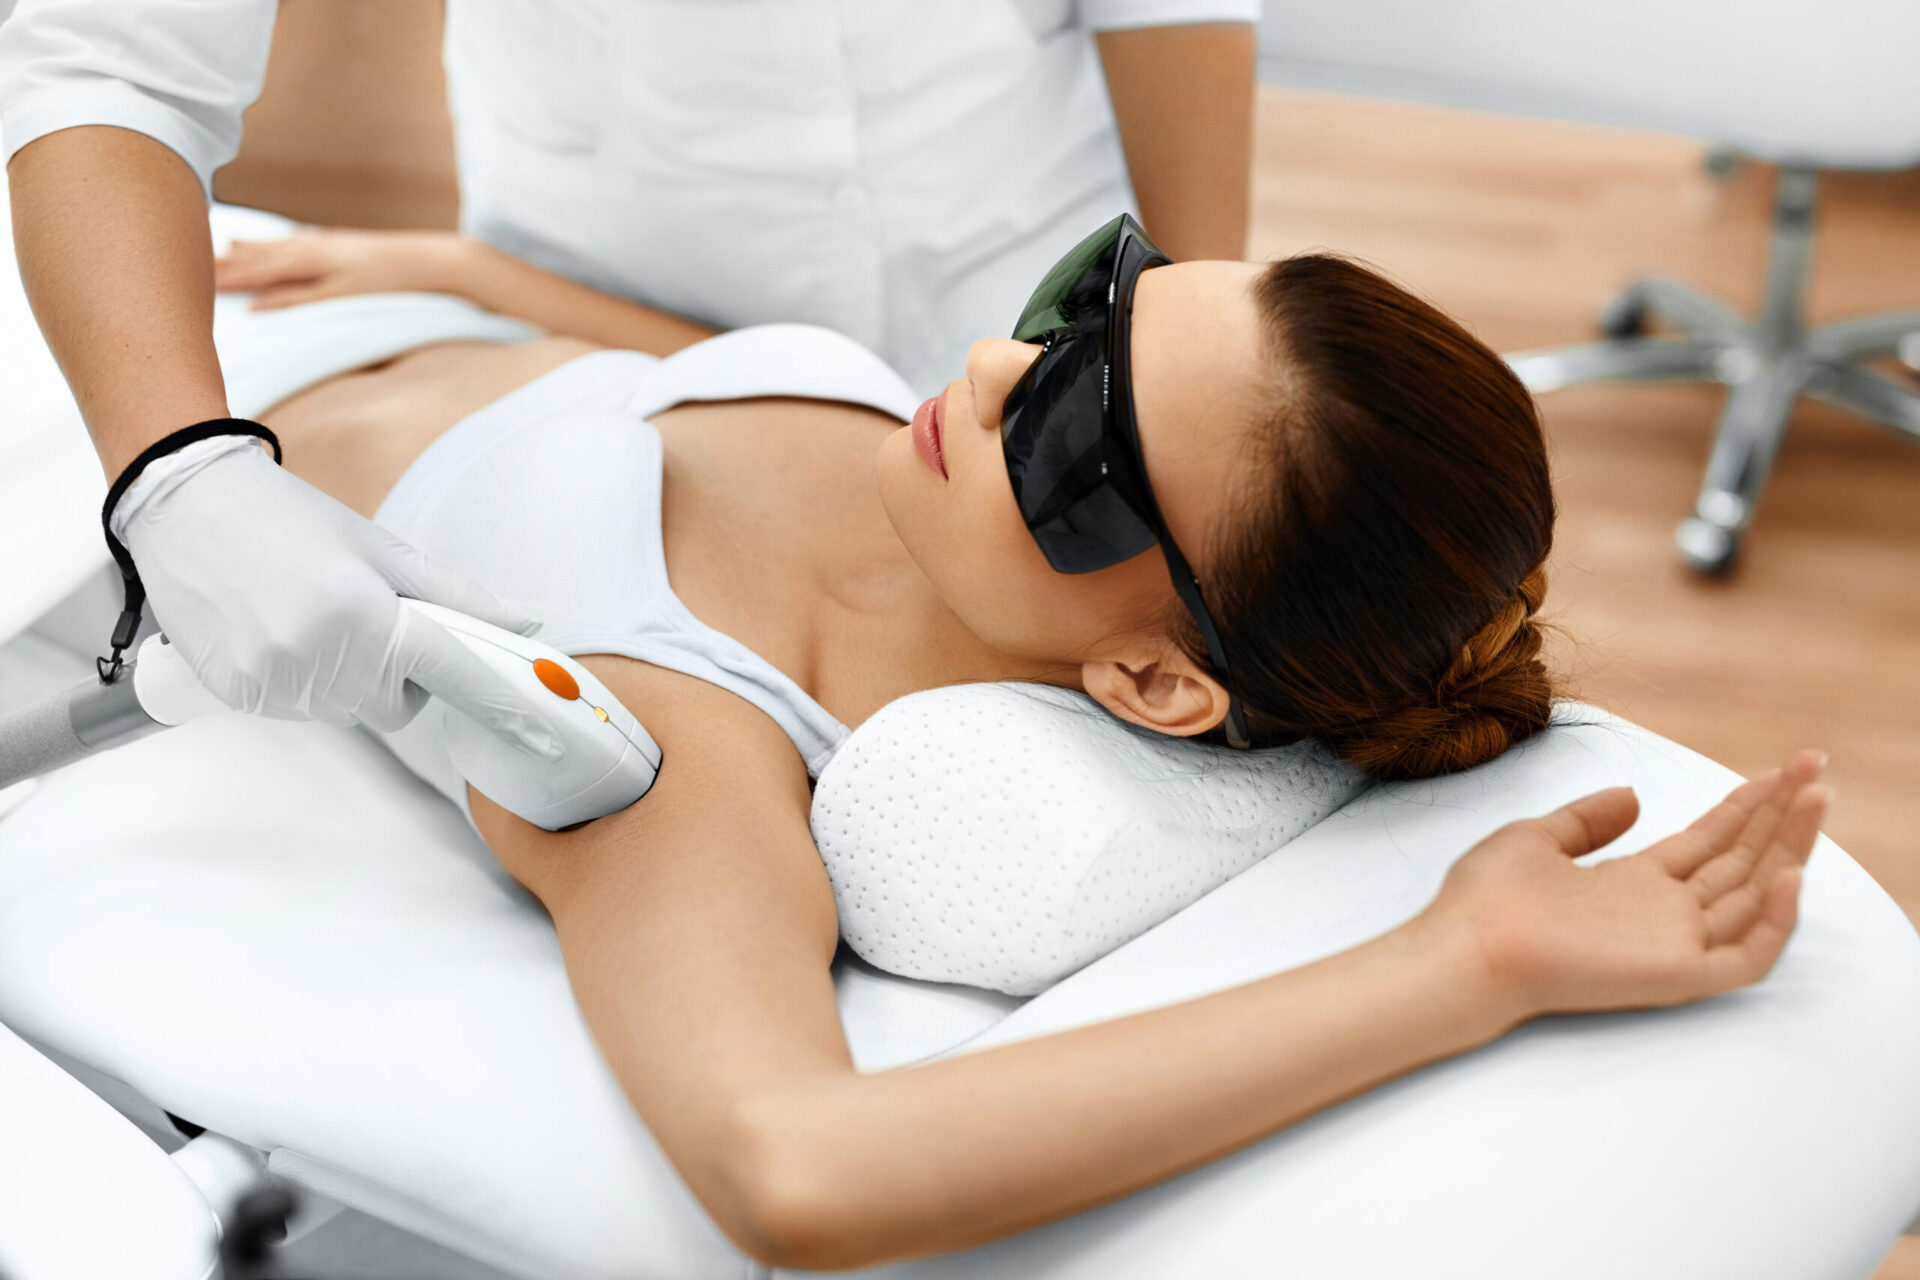 Body Care. Underarm Laser Hair Removal. Beautician Removing Hair Of Young Woman's Armpit. Laser Epilation Treatment In Cosmetic Beauty Clinic. Hairless Smooth And Soft Skin. Health And Beauty Concept.